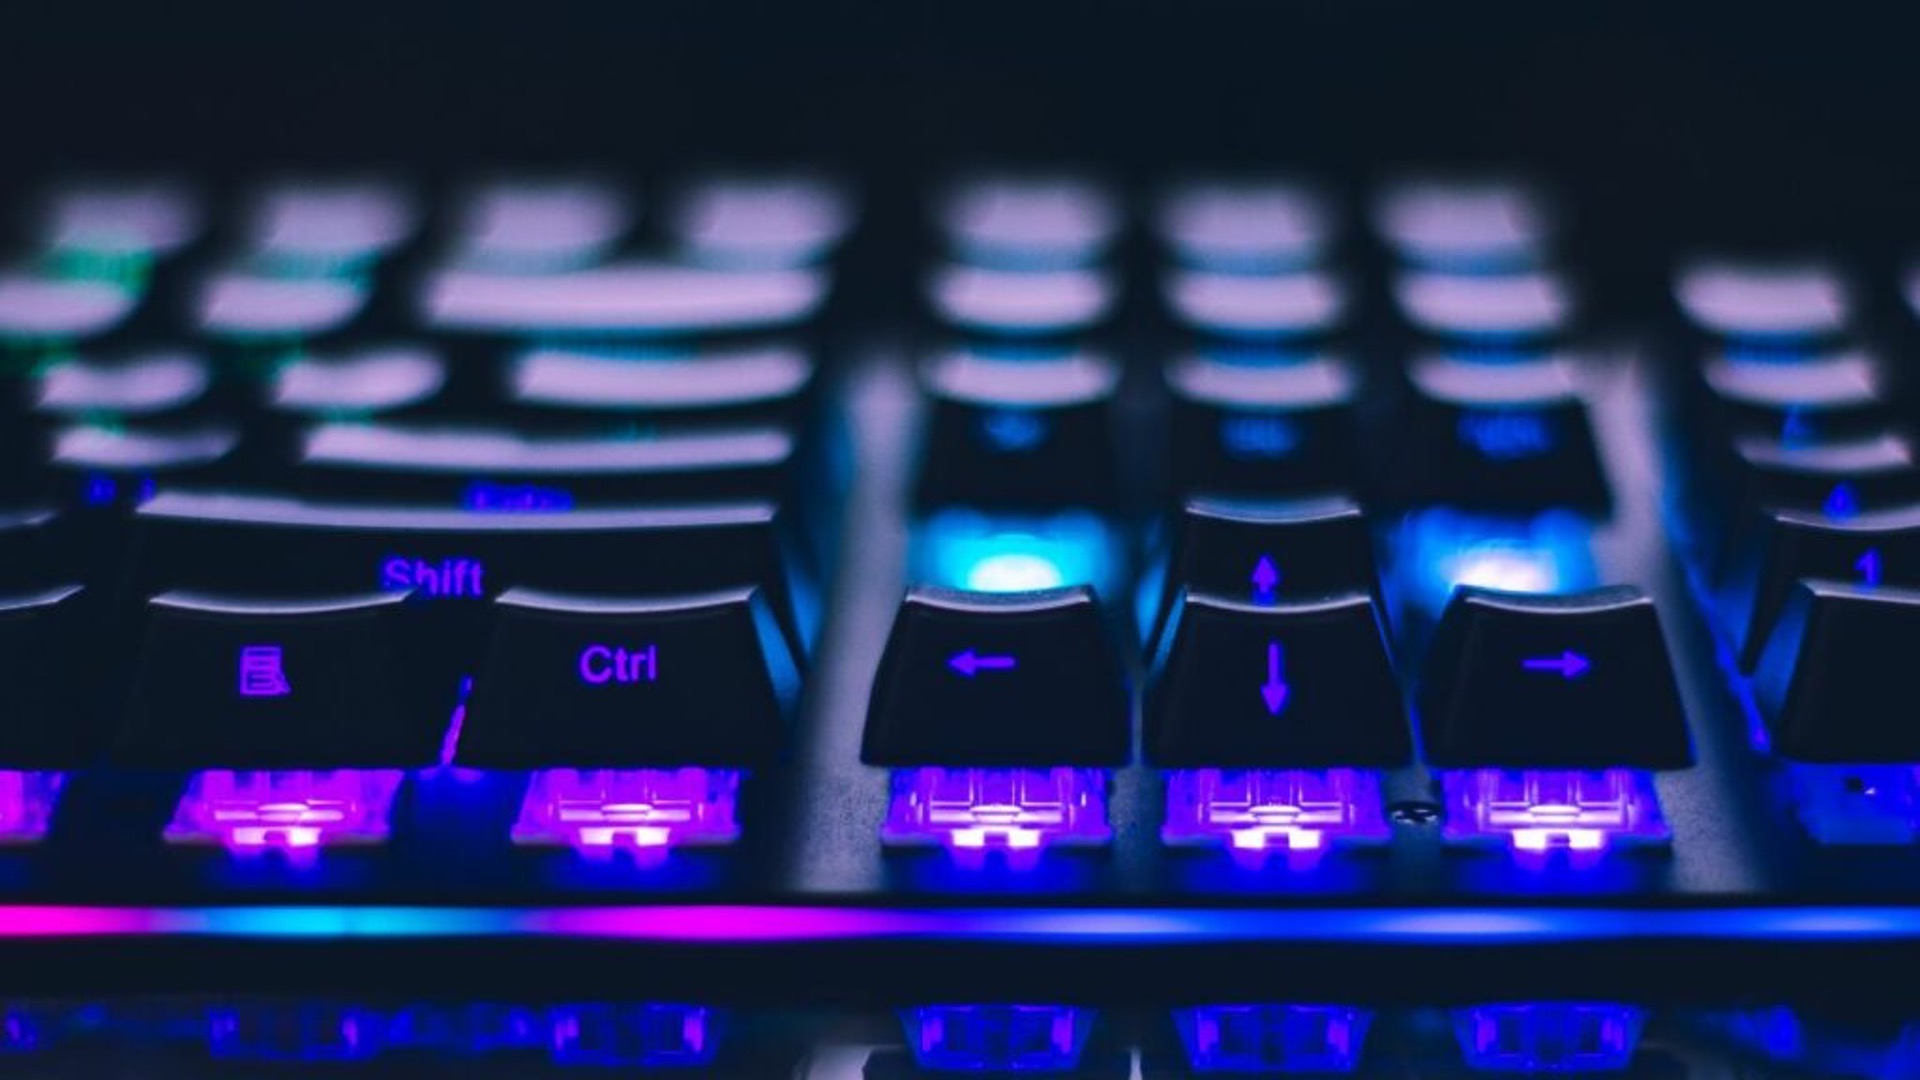 Wired Gaming Keyboard: How To Change Keyboard Color